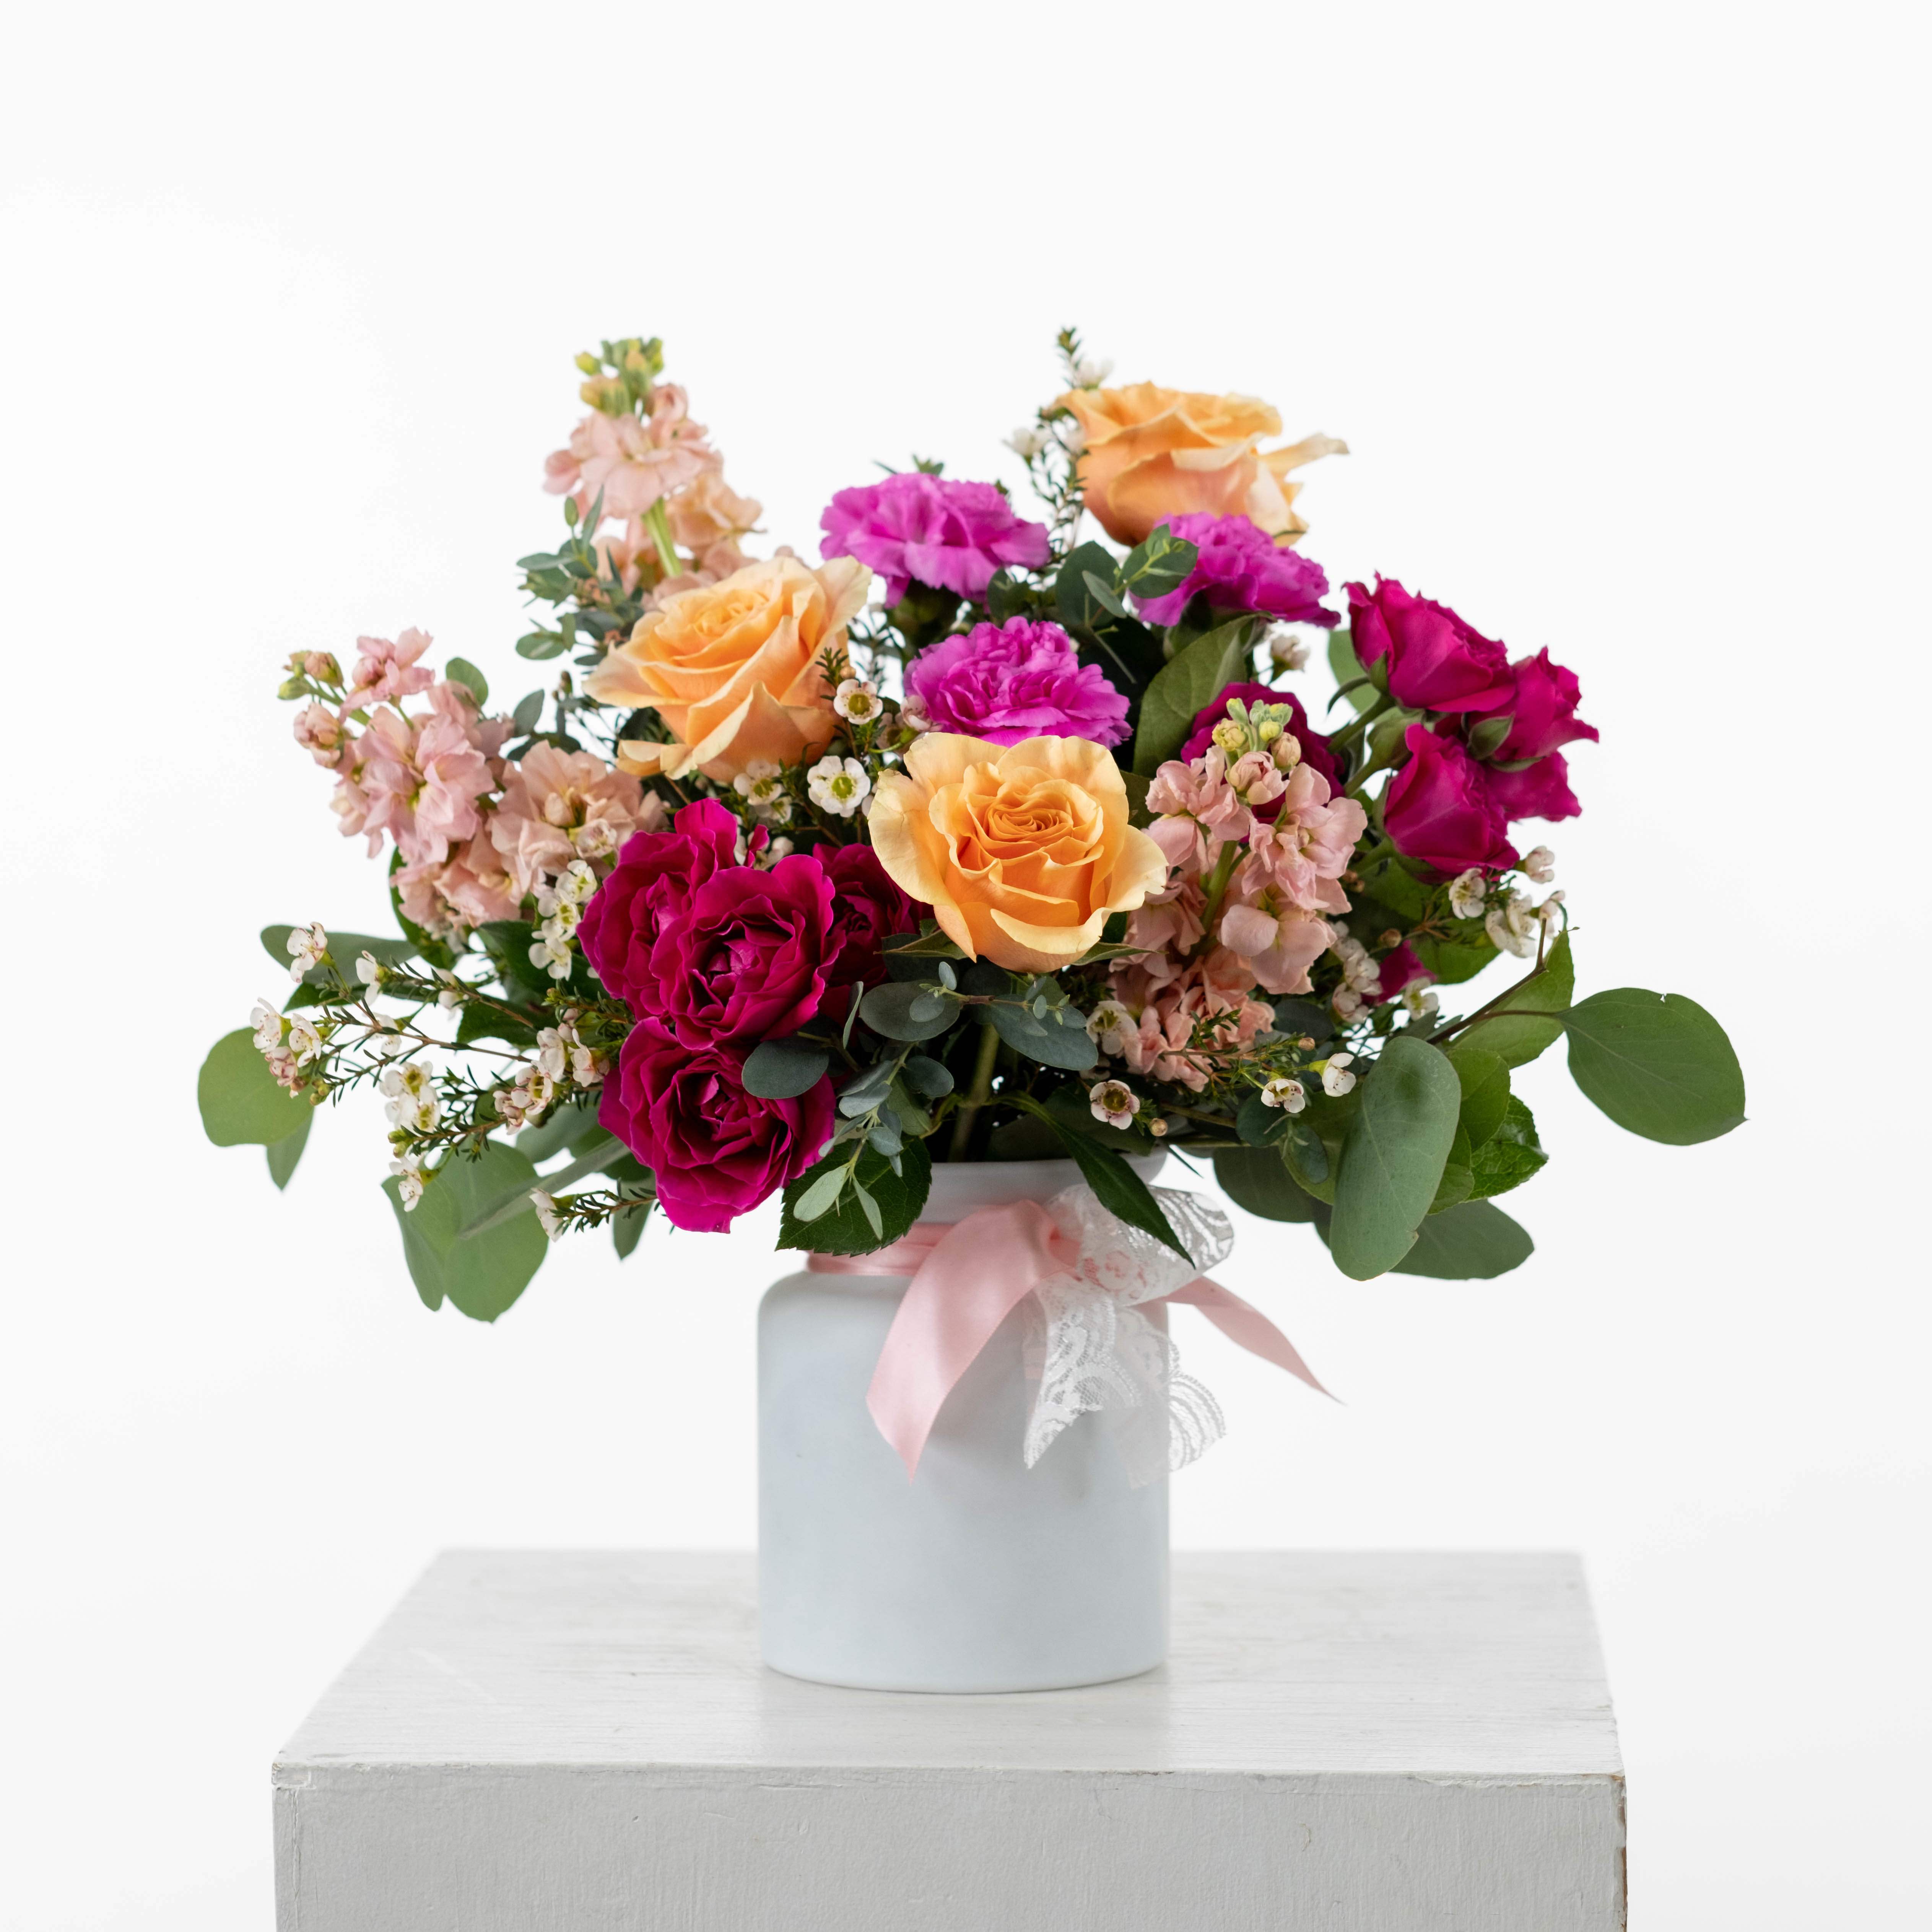 P.S. I Love You - Get ready to swoon with our P.S. I Love You Floral Design – a playful blend of peaches and hot pinks that will have hearts aflutter. Nestled in a chic white vase with a peach and lace ribbon, this arrangement is the perfect gesture in the most fabulous and colorful way!